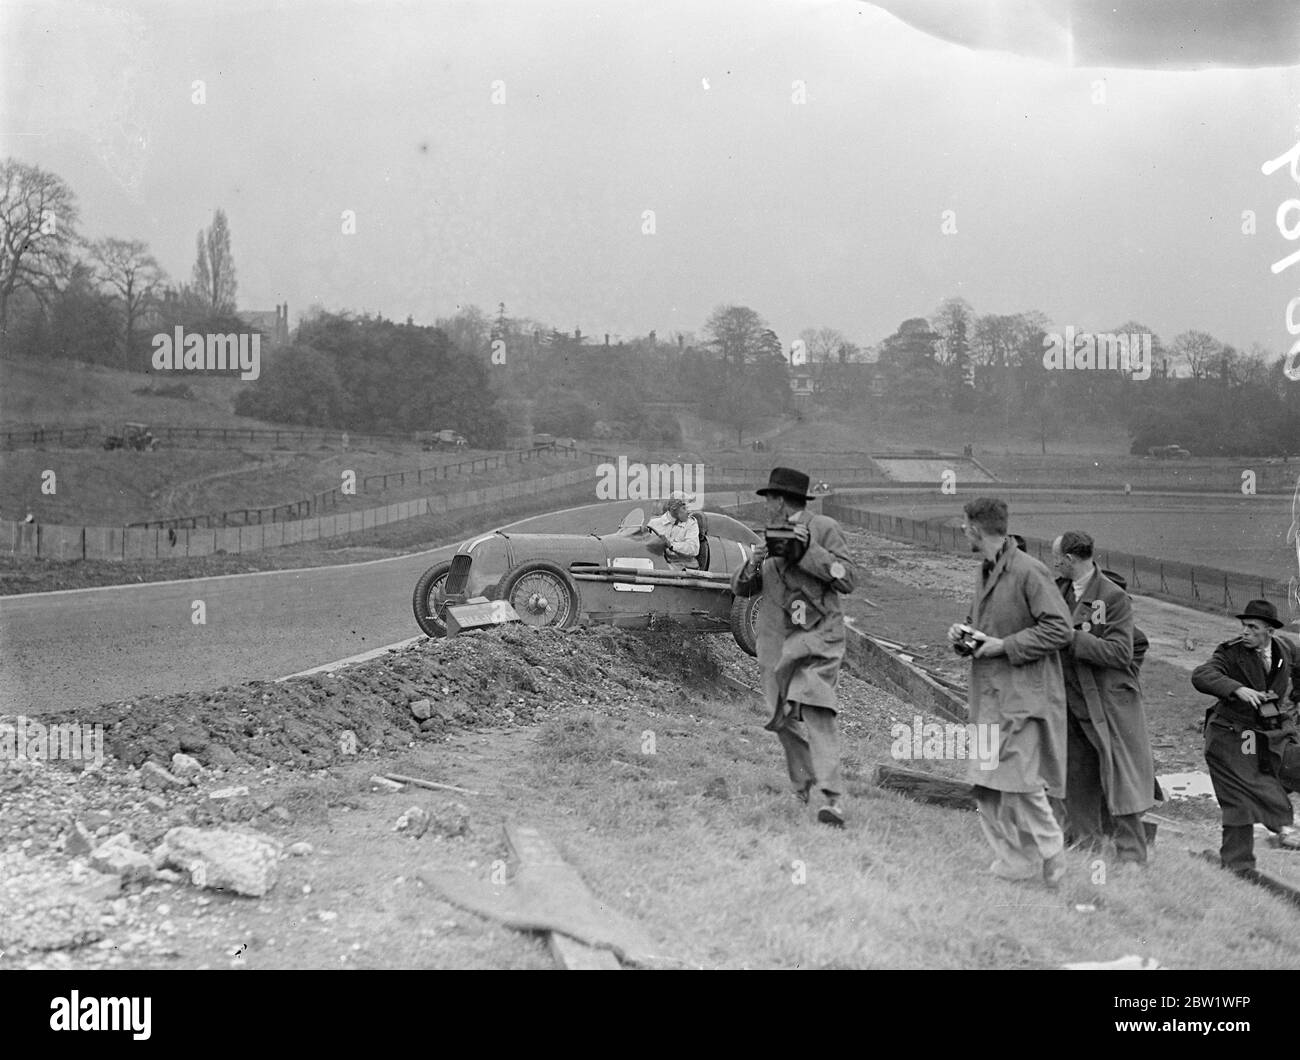 Appleton goes 'over the top' at new Crystal Palace track. Two mishaps marked the first practice by racing drivers after the opening by Earl Howe of the new road racing circuit at the Crystal Palace. Page H J W Appleton went 'over the top' at Stadium corner and Raymond Mays ran off the track owing to a wheel locking at the same point. Photo shows, page H J W Appleton going over the top of the banking at Stadium corner. 22 April 1937 Stock Photo